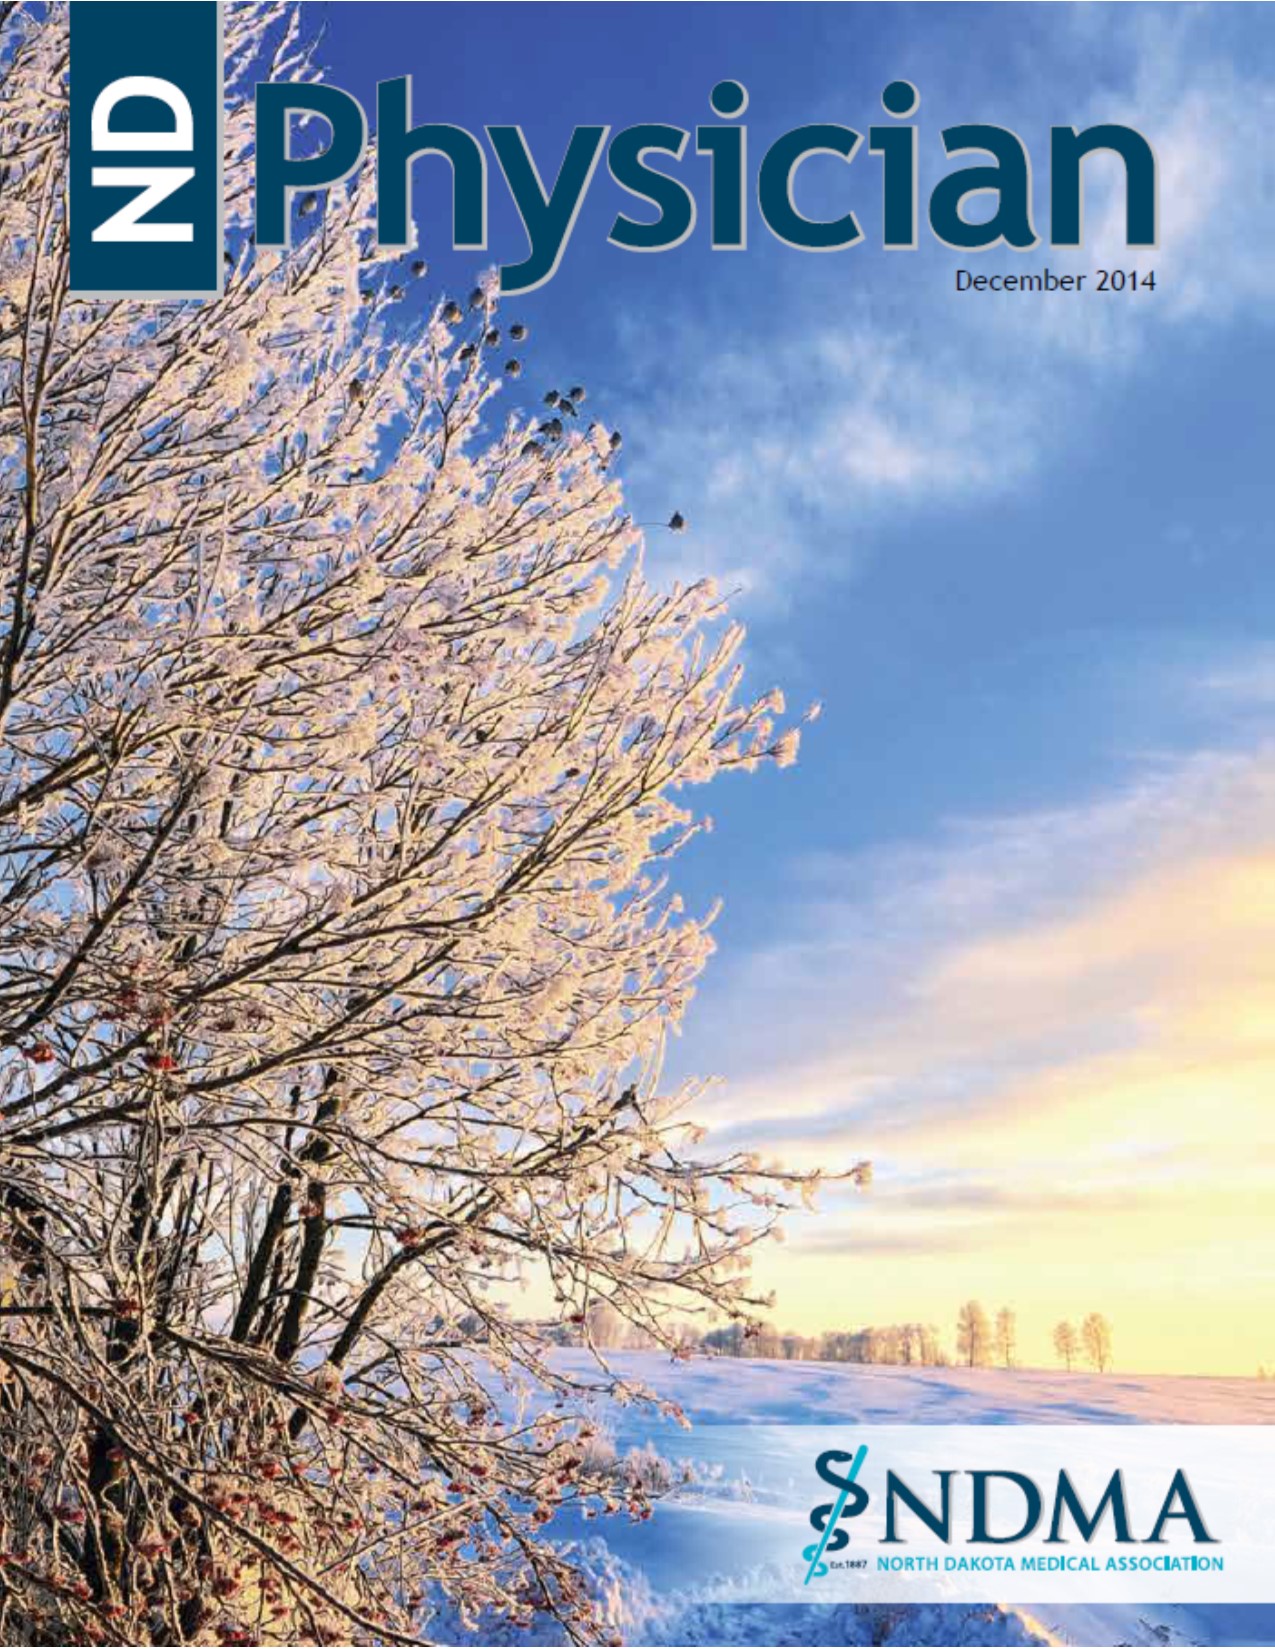 ND Physician December 2014 magazine cover